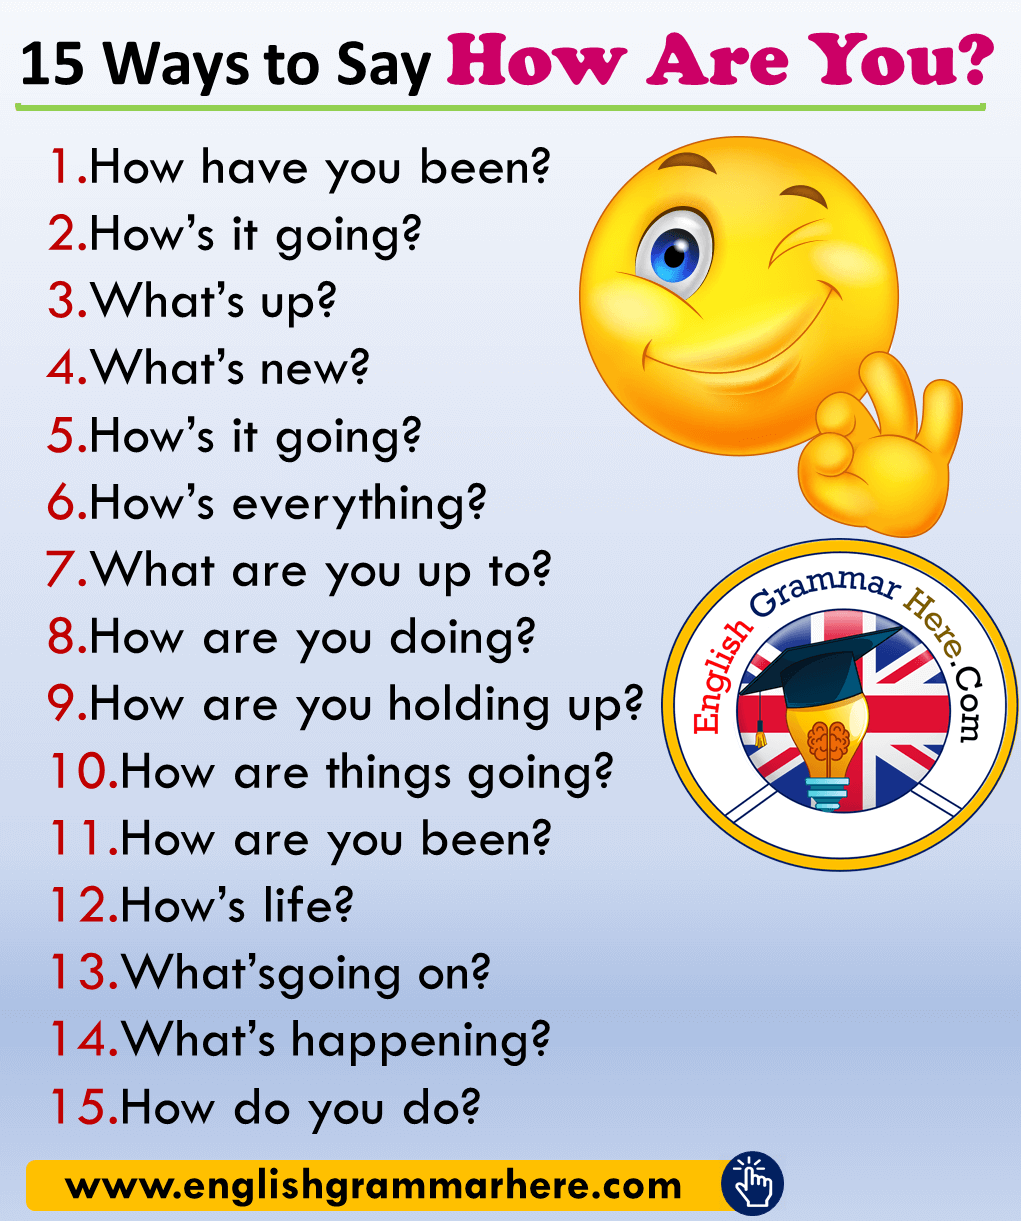 15 Ways to Say How Are You? in English